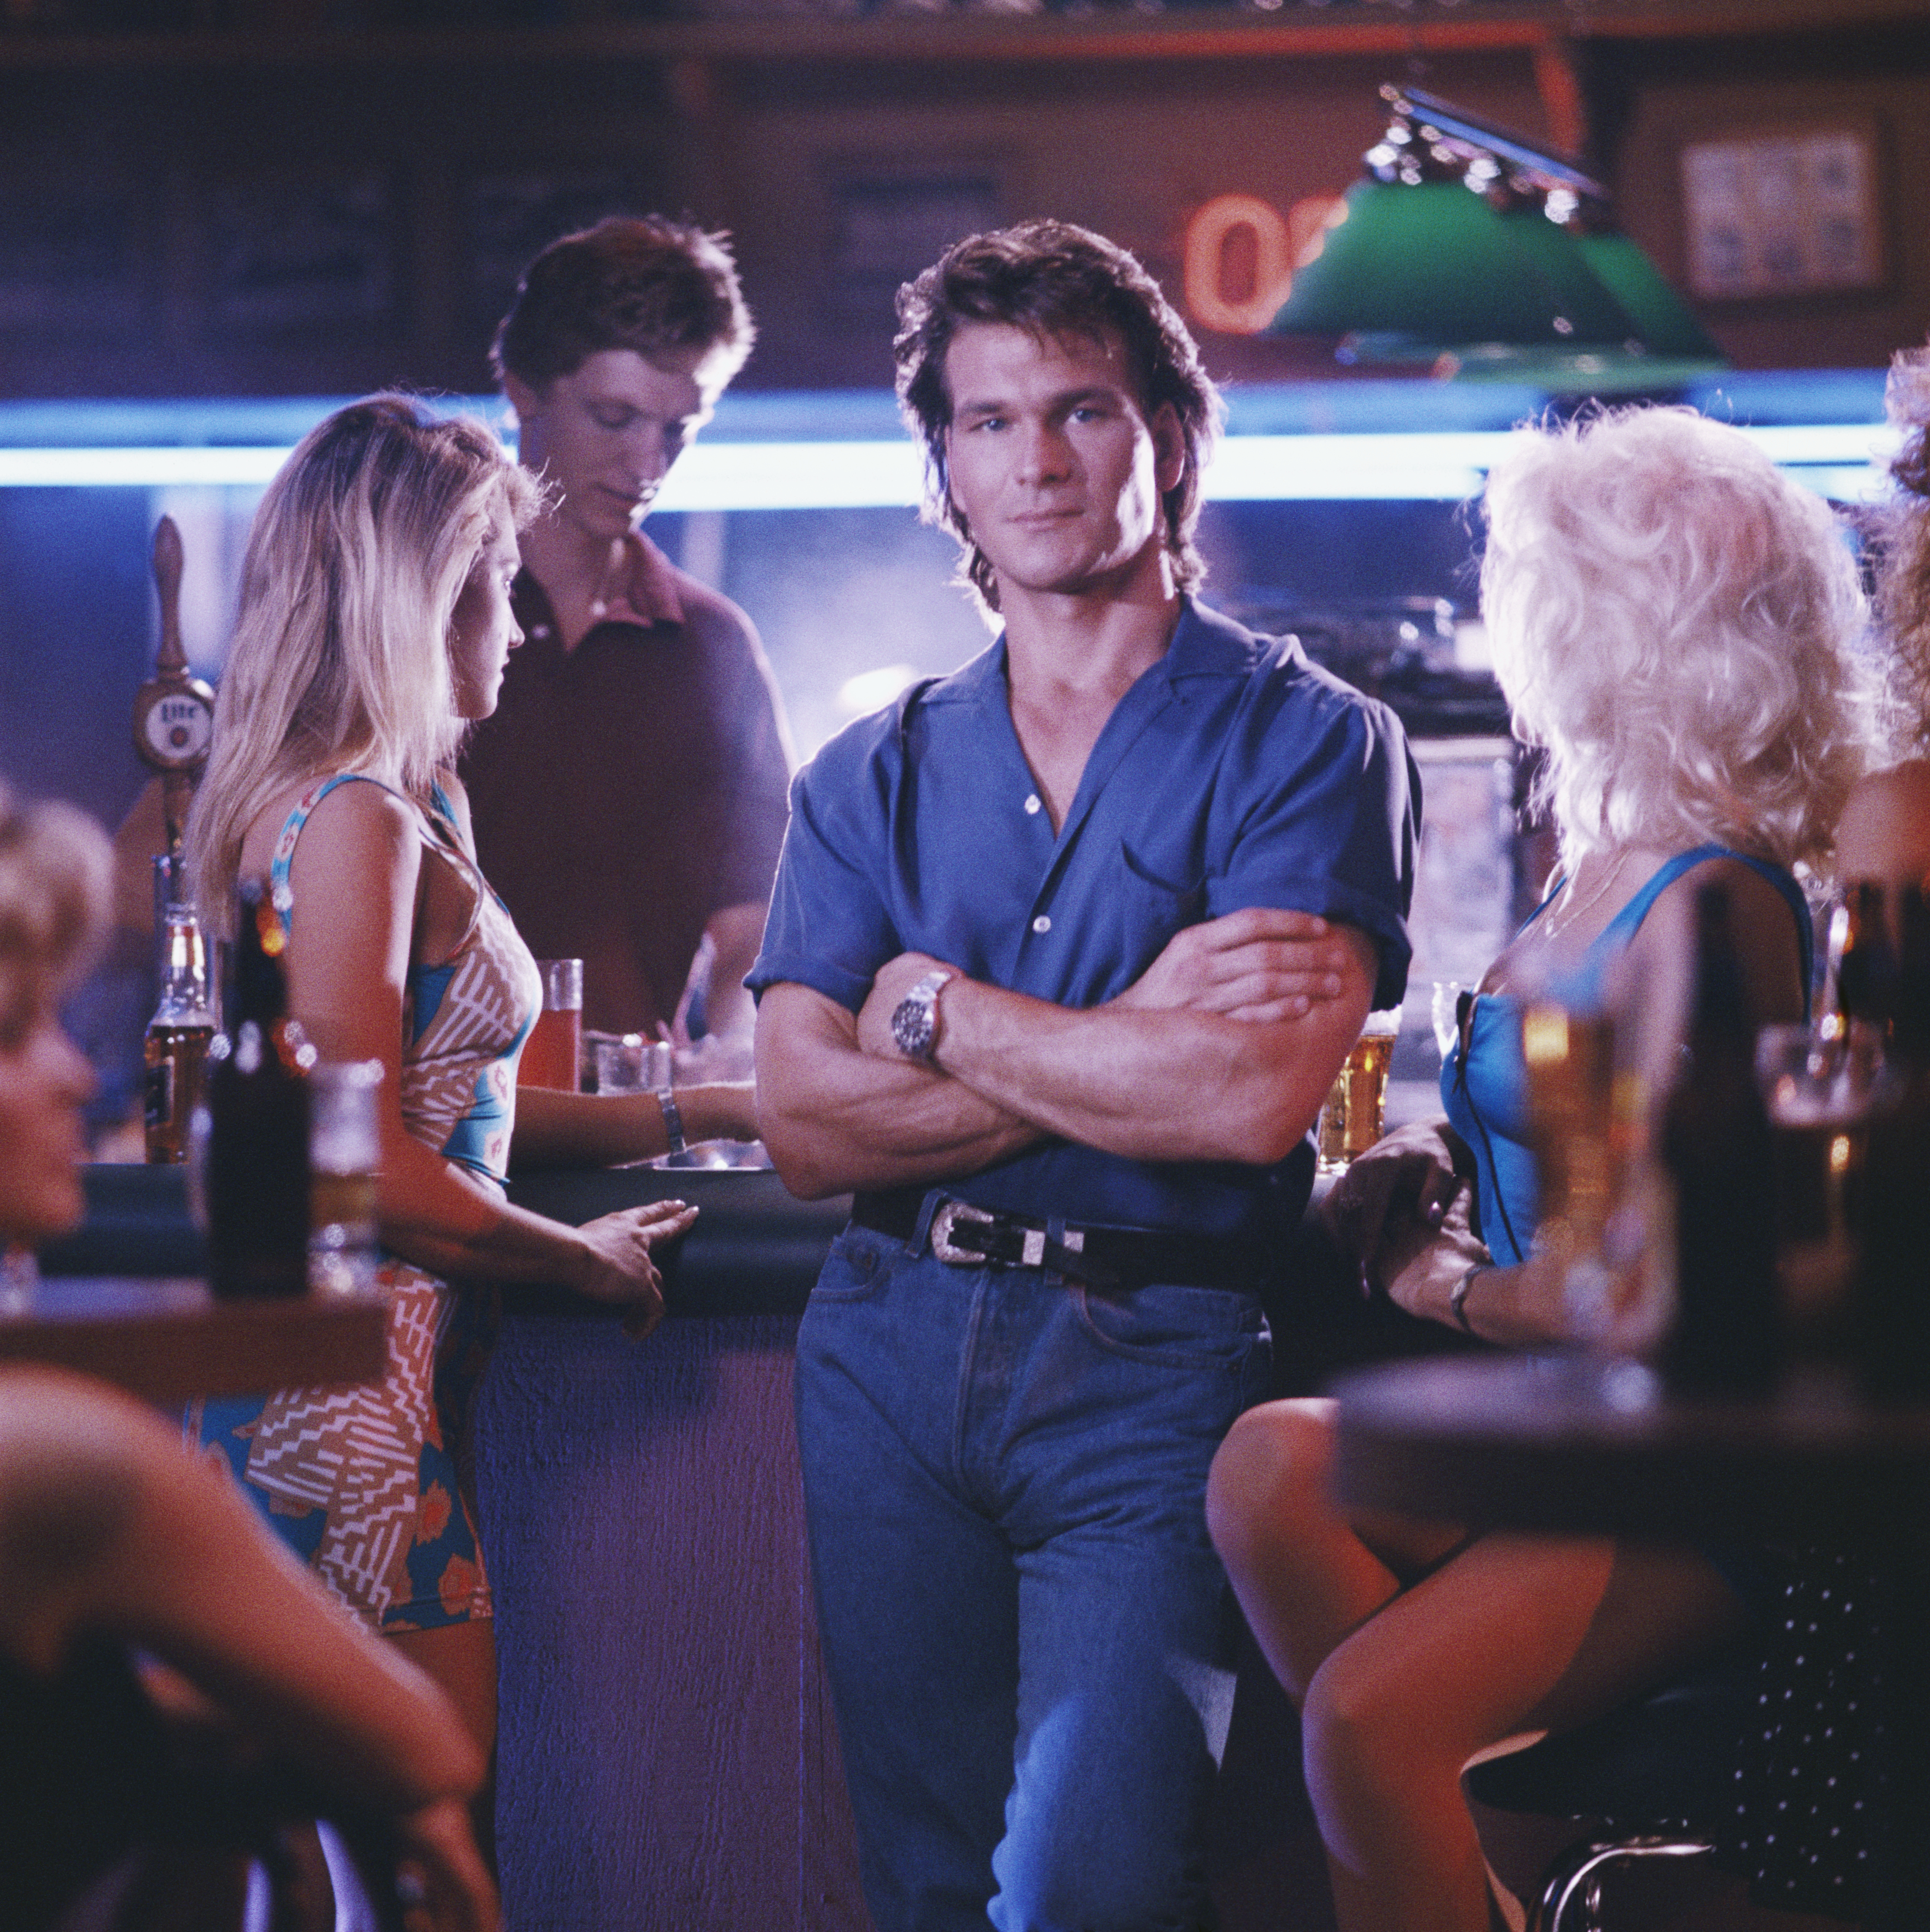 "Dirty Dancing" star Patrick Swayze | Source: Getty Images